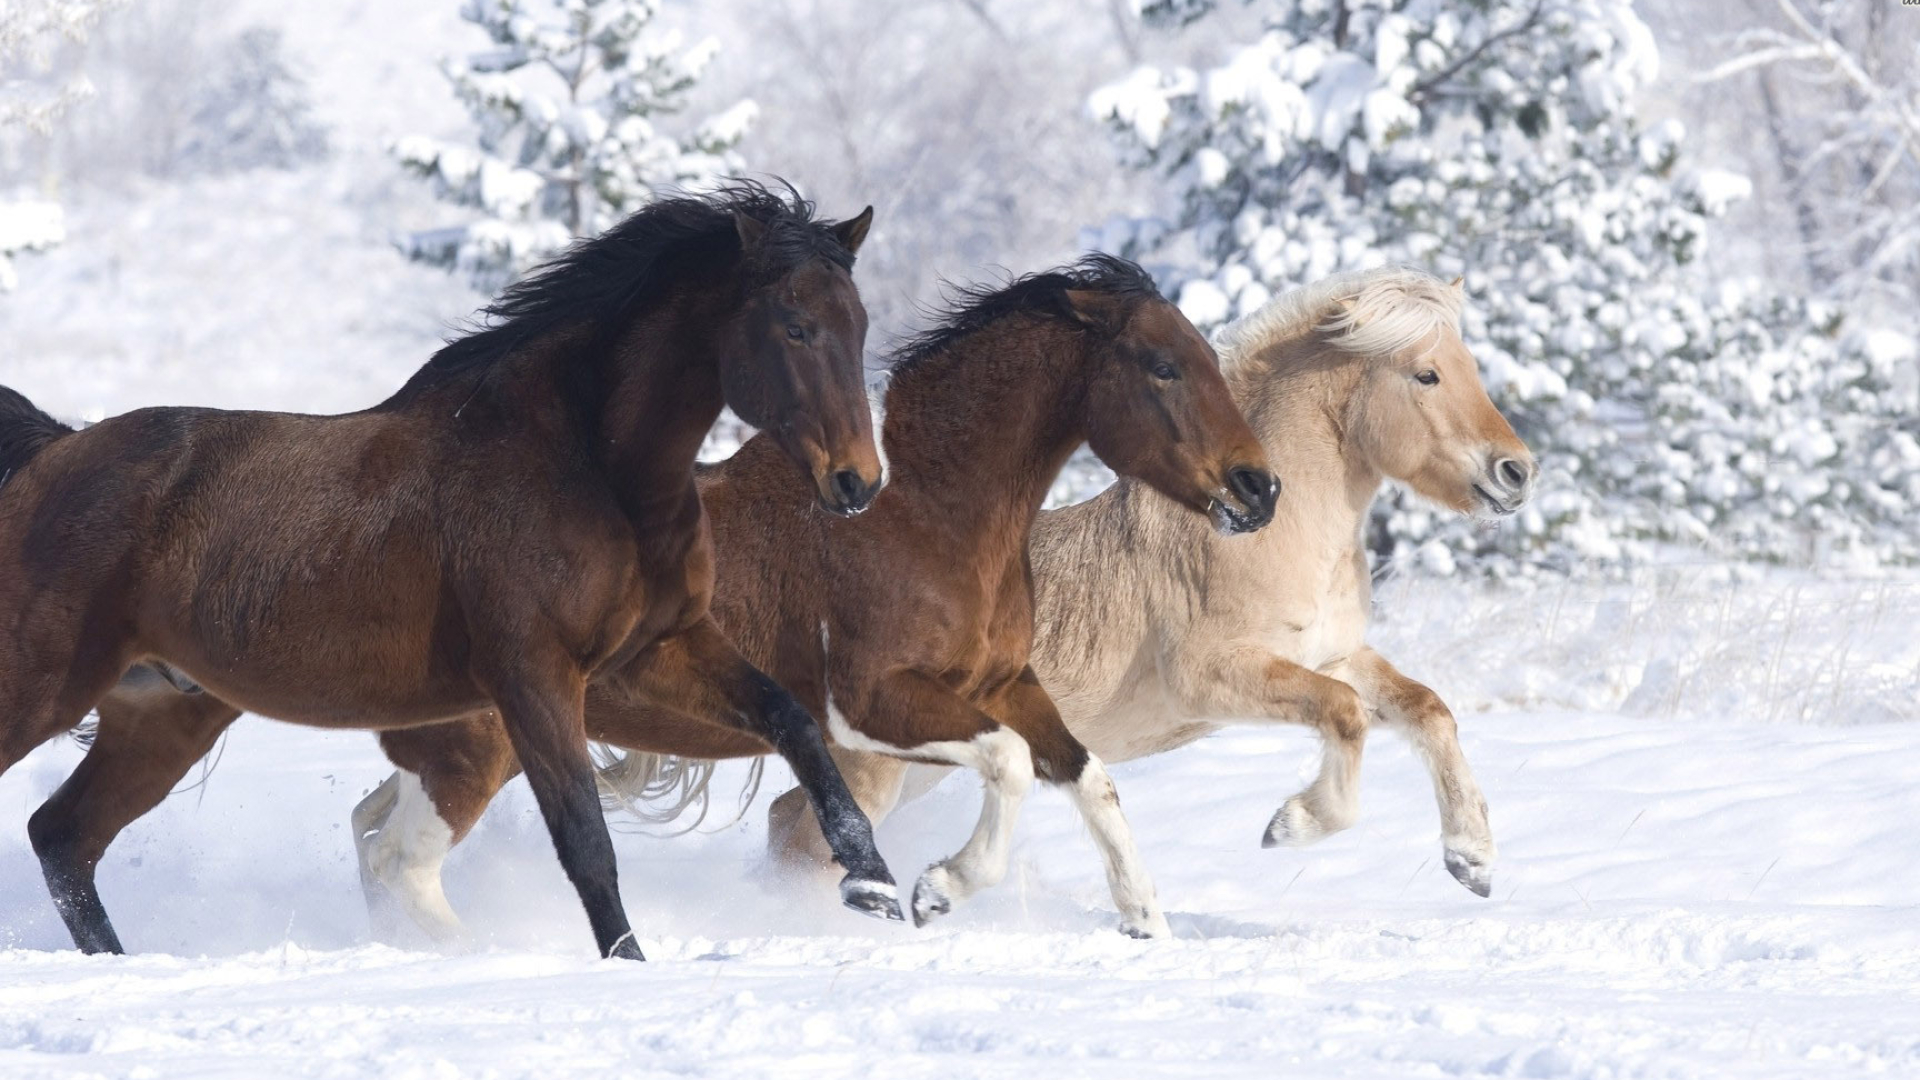 Horses in the snow, Graceful and powerful, Winter wonderland, Picturesque scenery, 1920x1080 Full HD Desktop